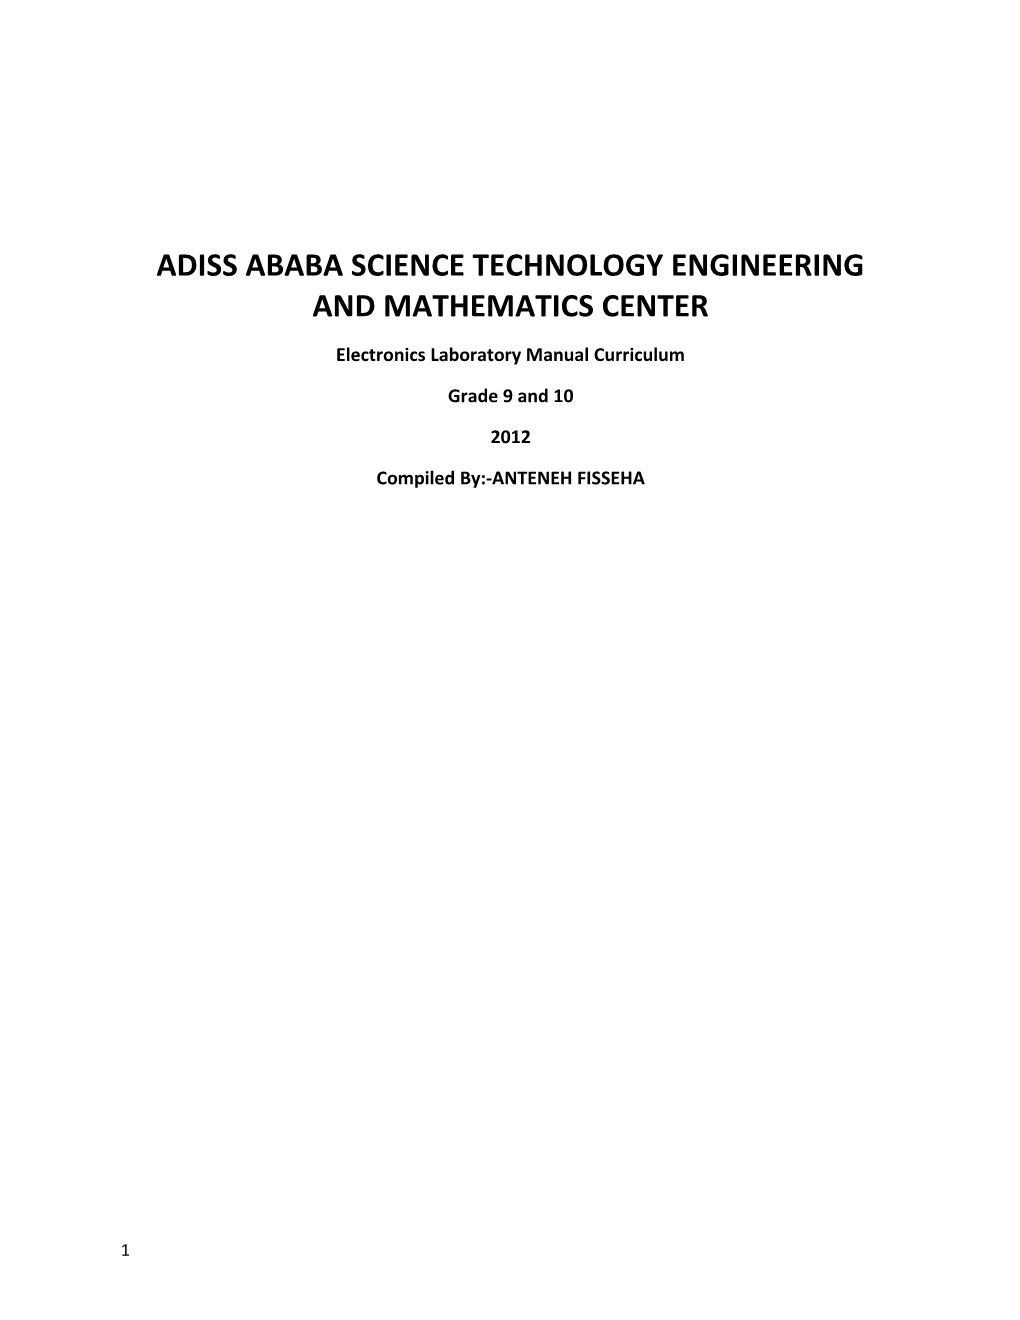 Adiss Ababa Science Technology Engineering and Mathematics Center